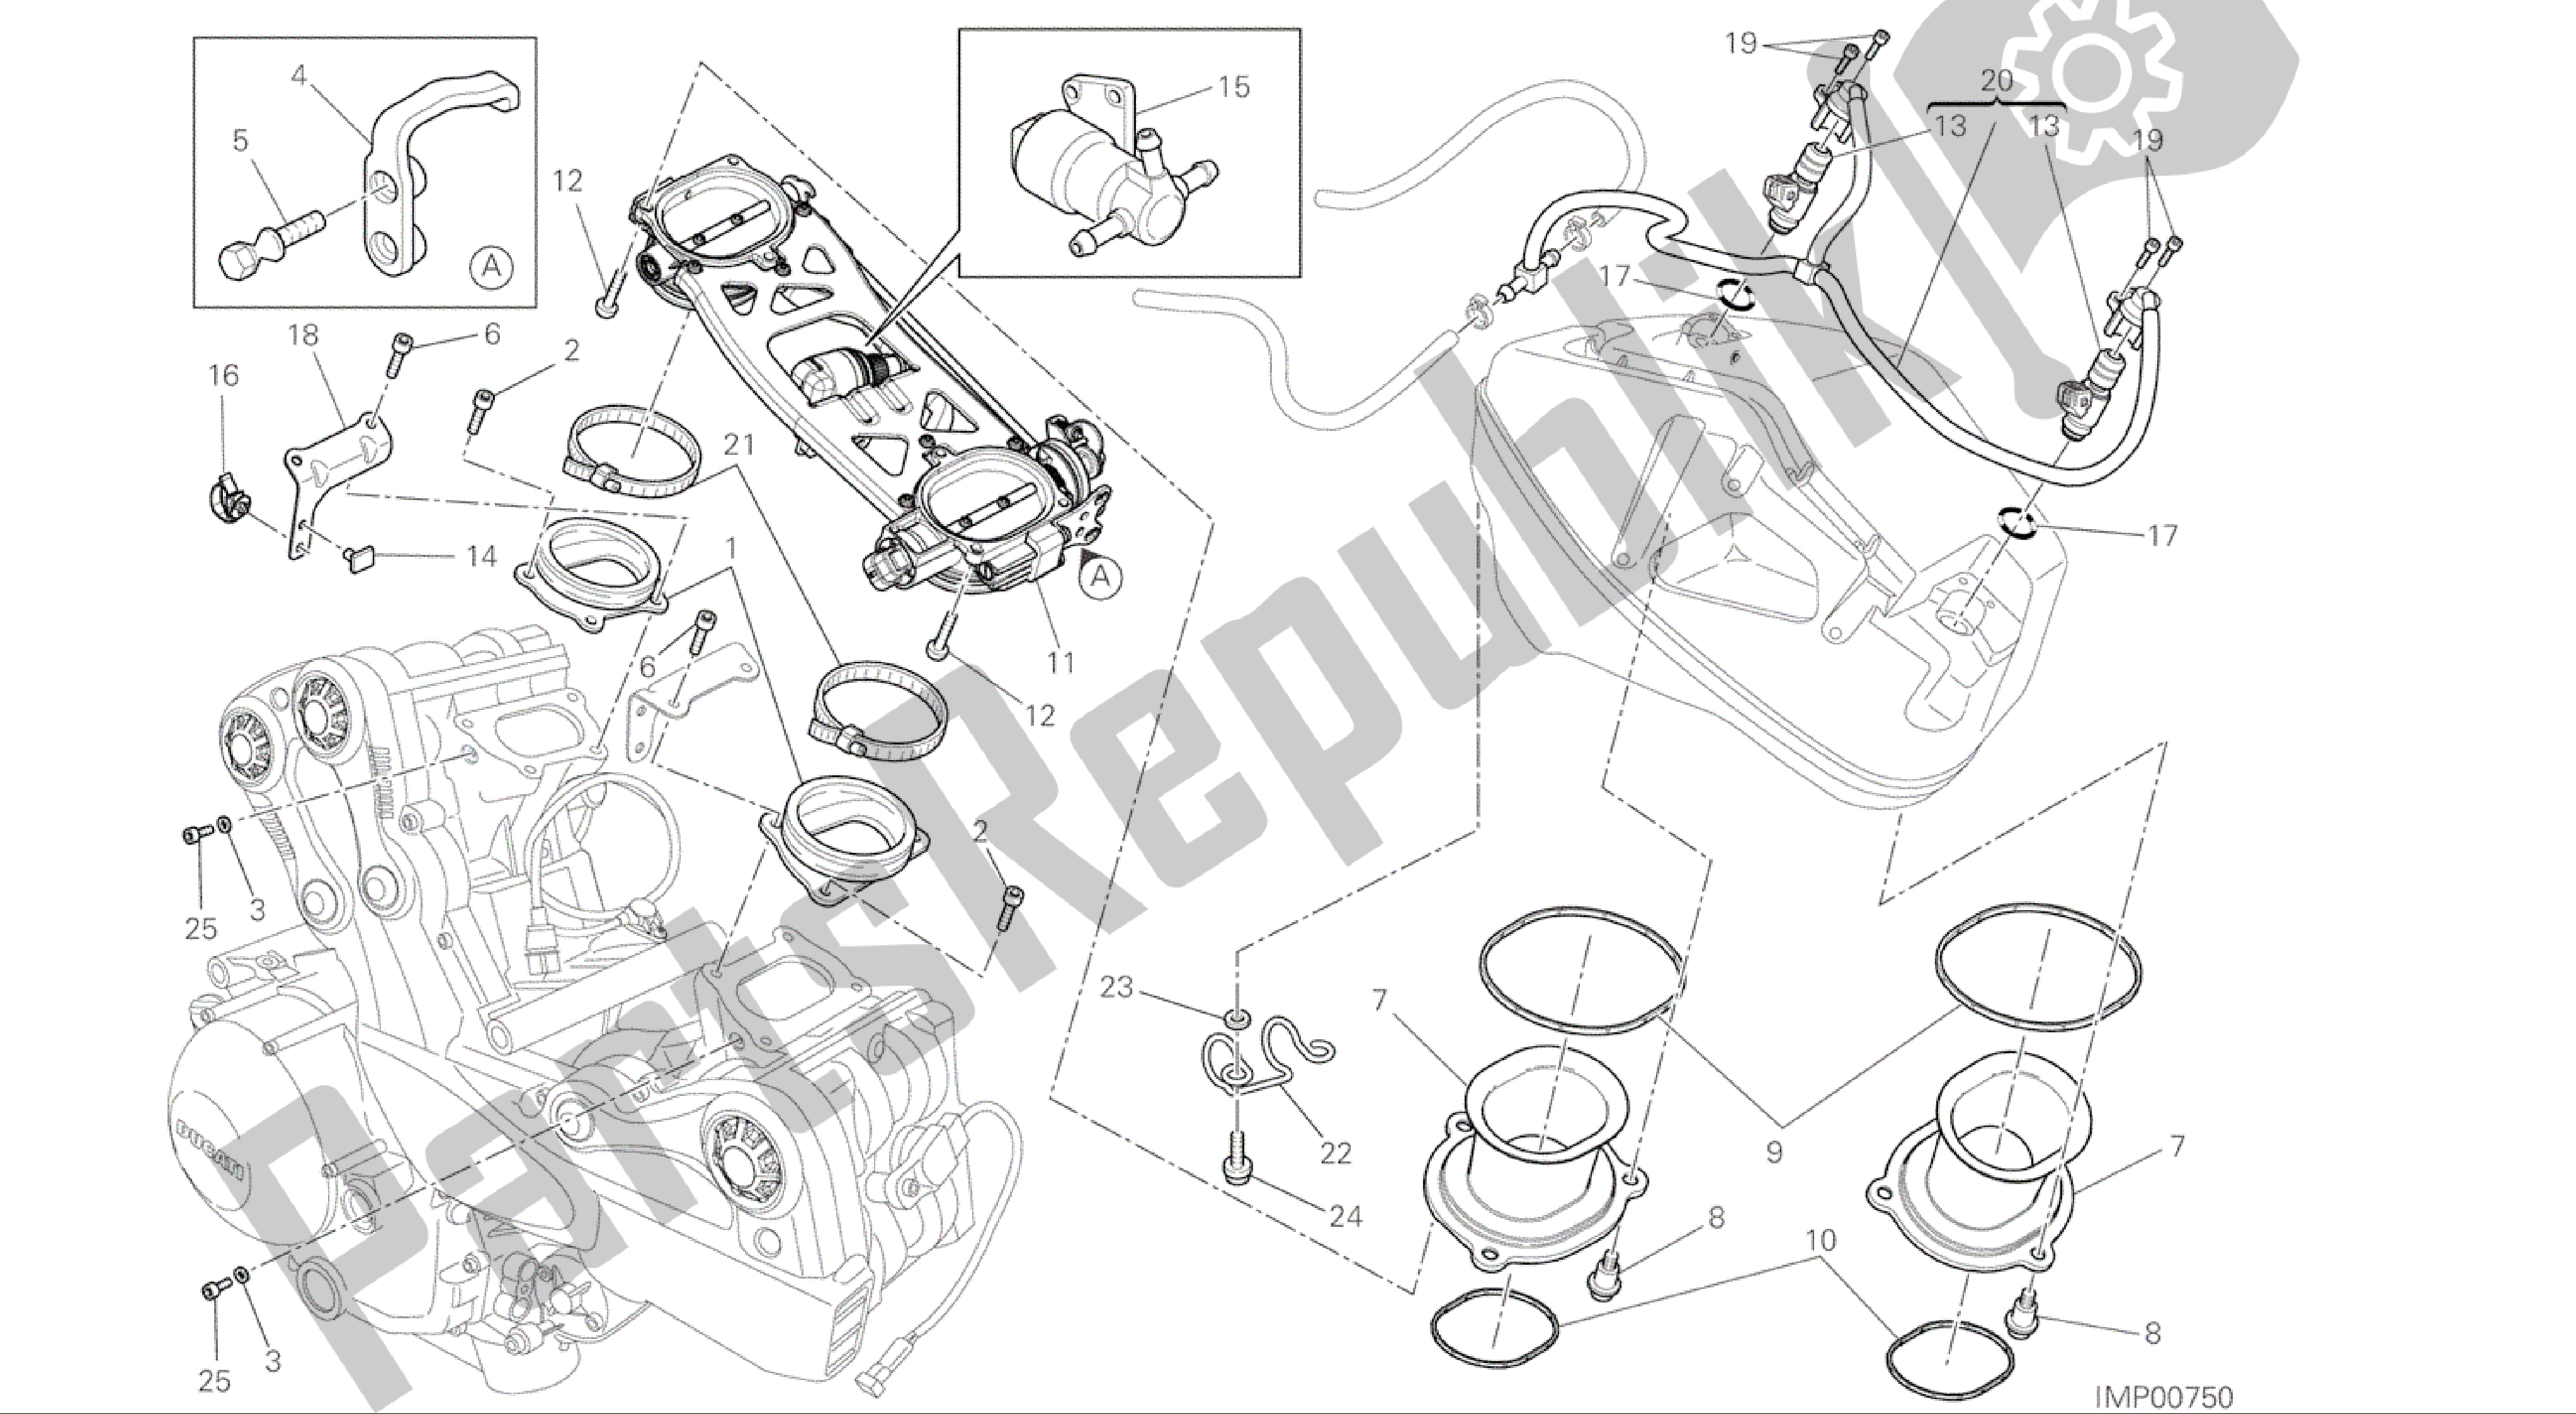 All parts for the Drawing 017 - Throttle Body [mod:f848;xst:aus,eur,fra,jap]group Engine of the Ducati Streetfighter 848 2015